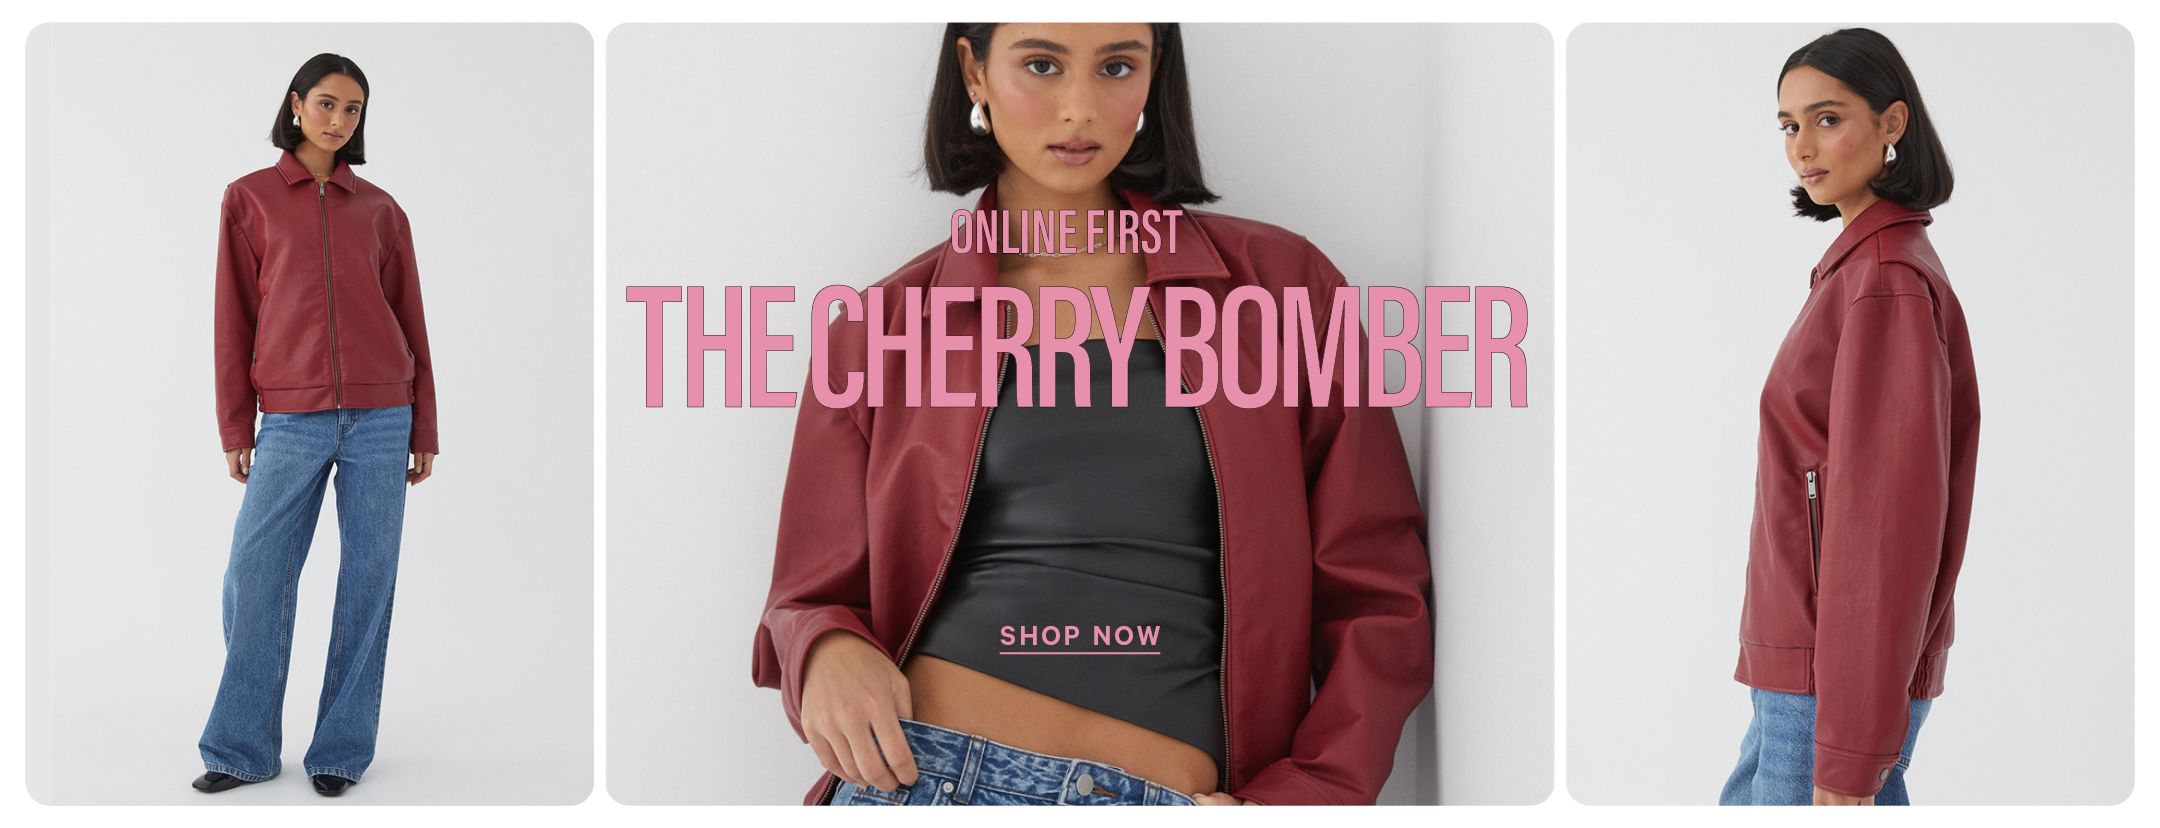 Shop the Online Exclusive Cherry Bomber Jacket at Supre